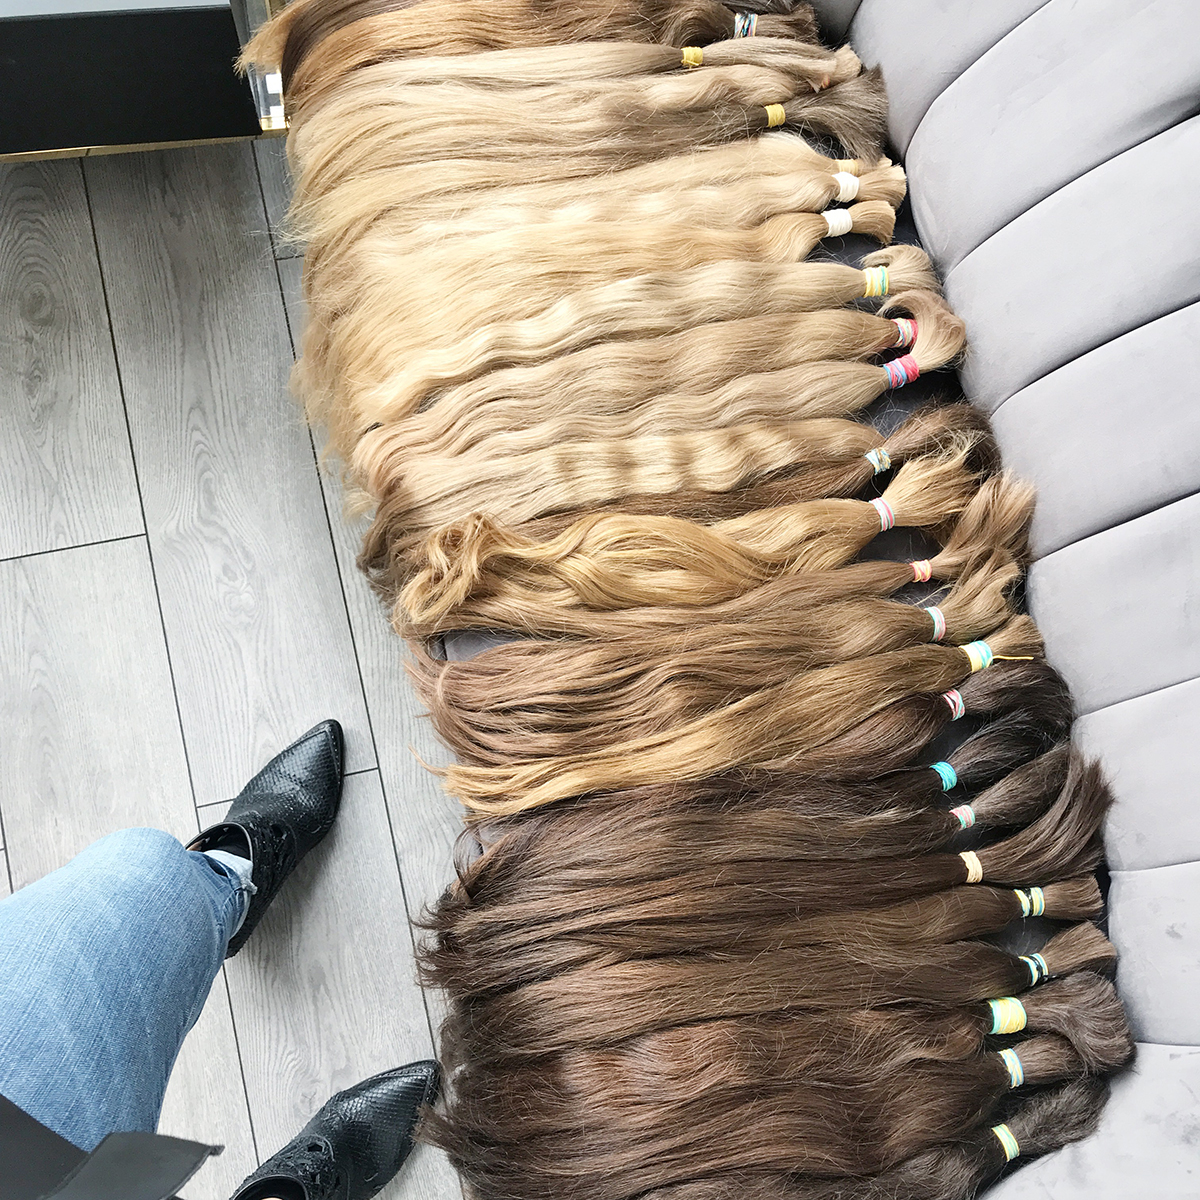 Slavic Virgin Hair Extensions |Different coloured cut out ponytails laid on a grey suede sofa.